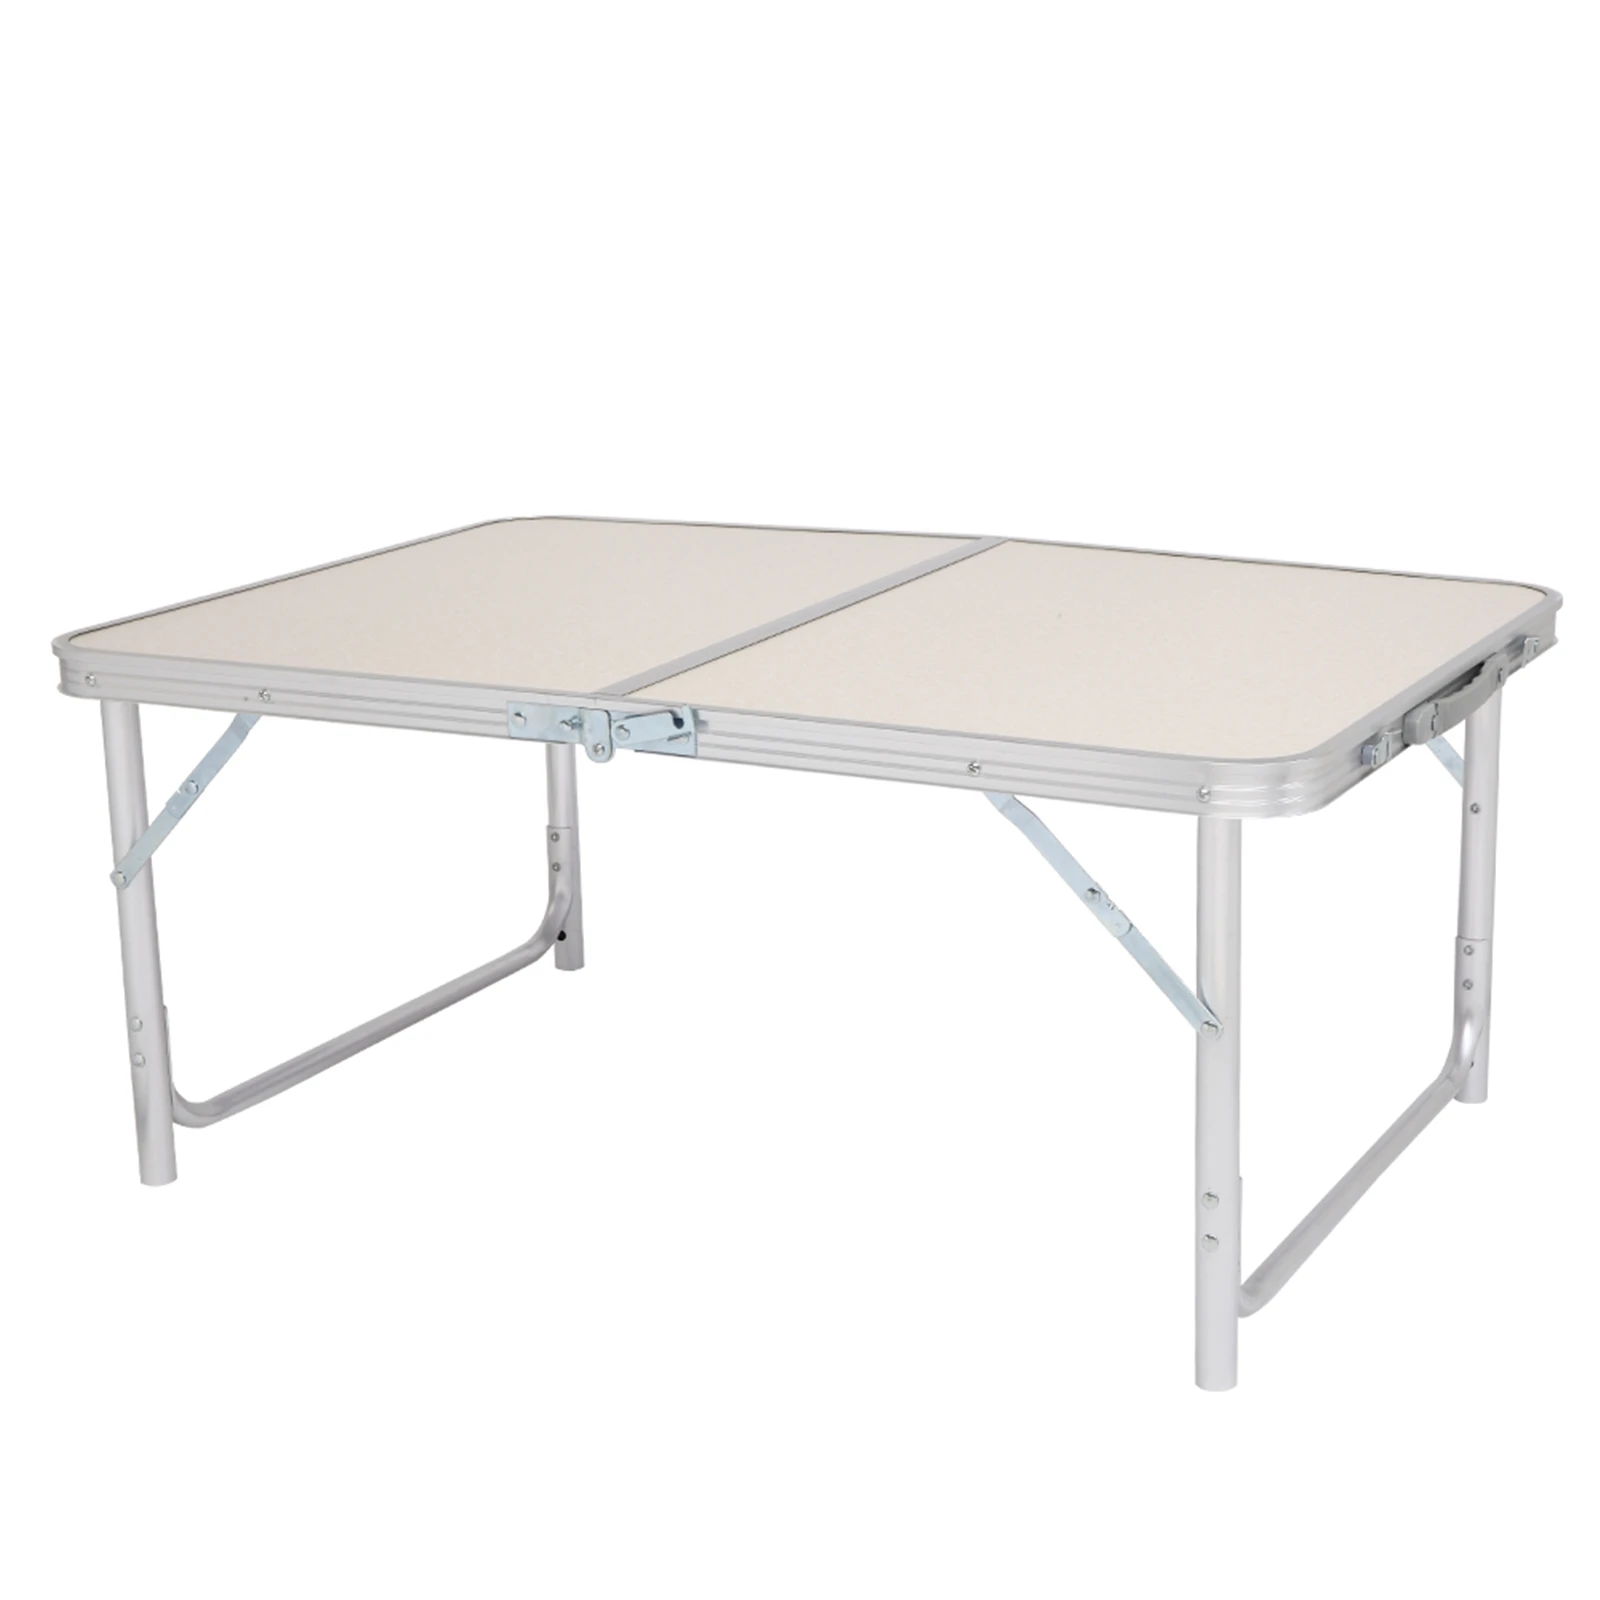 Details about   90 x 60 x 70cm White Folding Table Aluminum Alloy Party Picnics Camping Home Use 